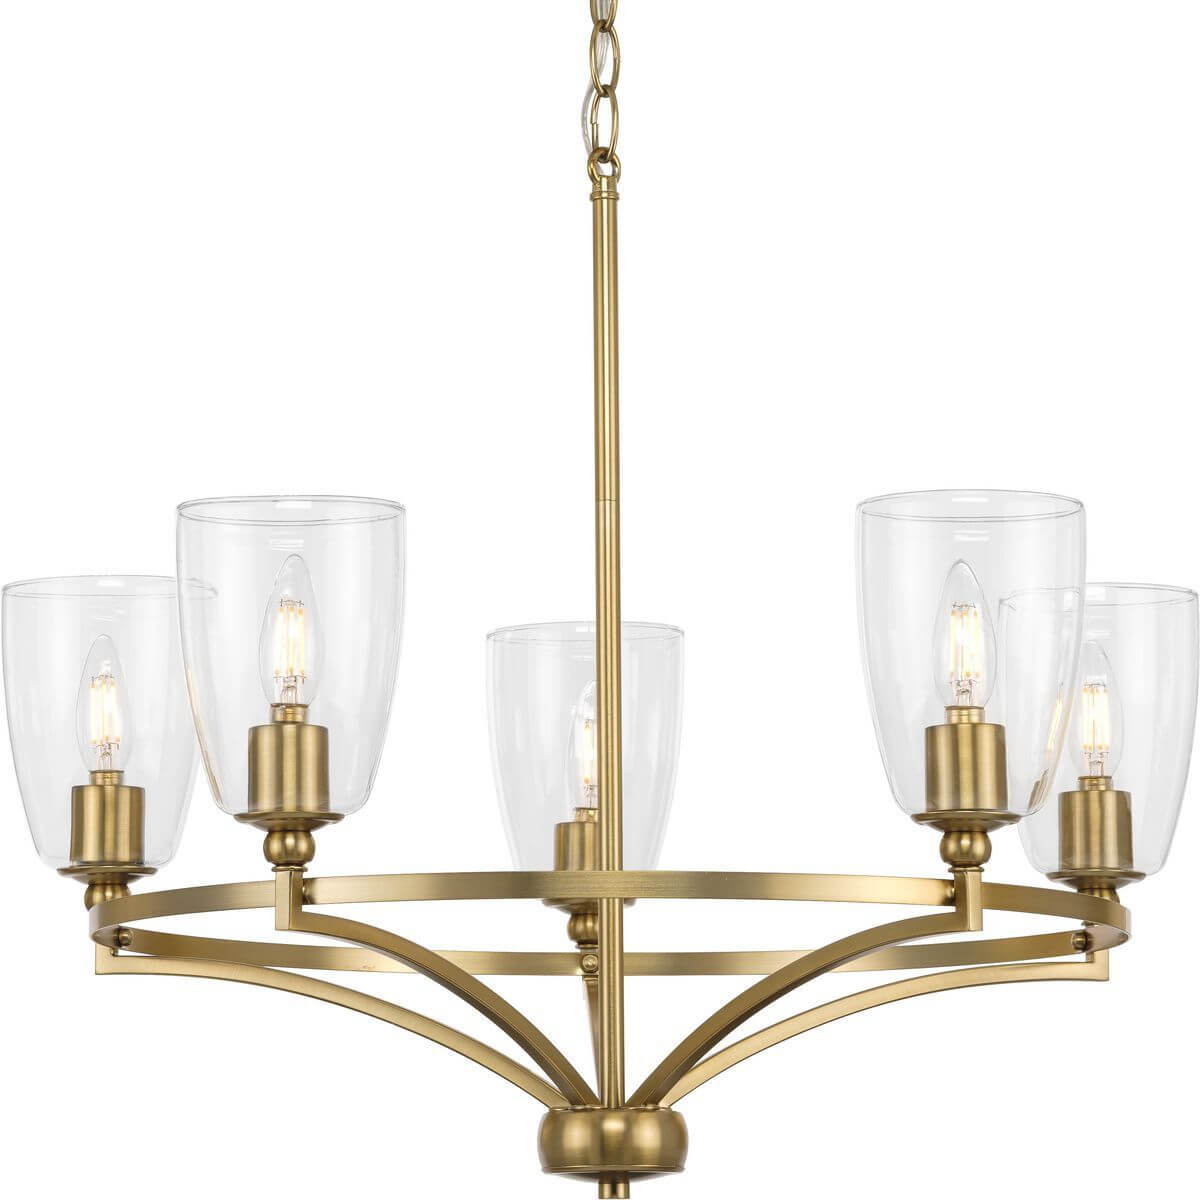 Progress Lighting Parkhurst 5 Light 25 inch Chandelier in Brushed Bronze with Clear Glass P400296-109